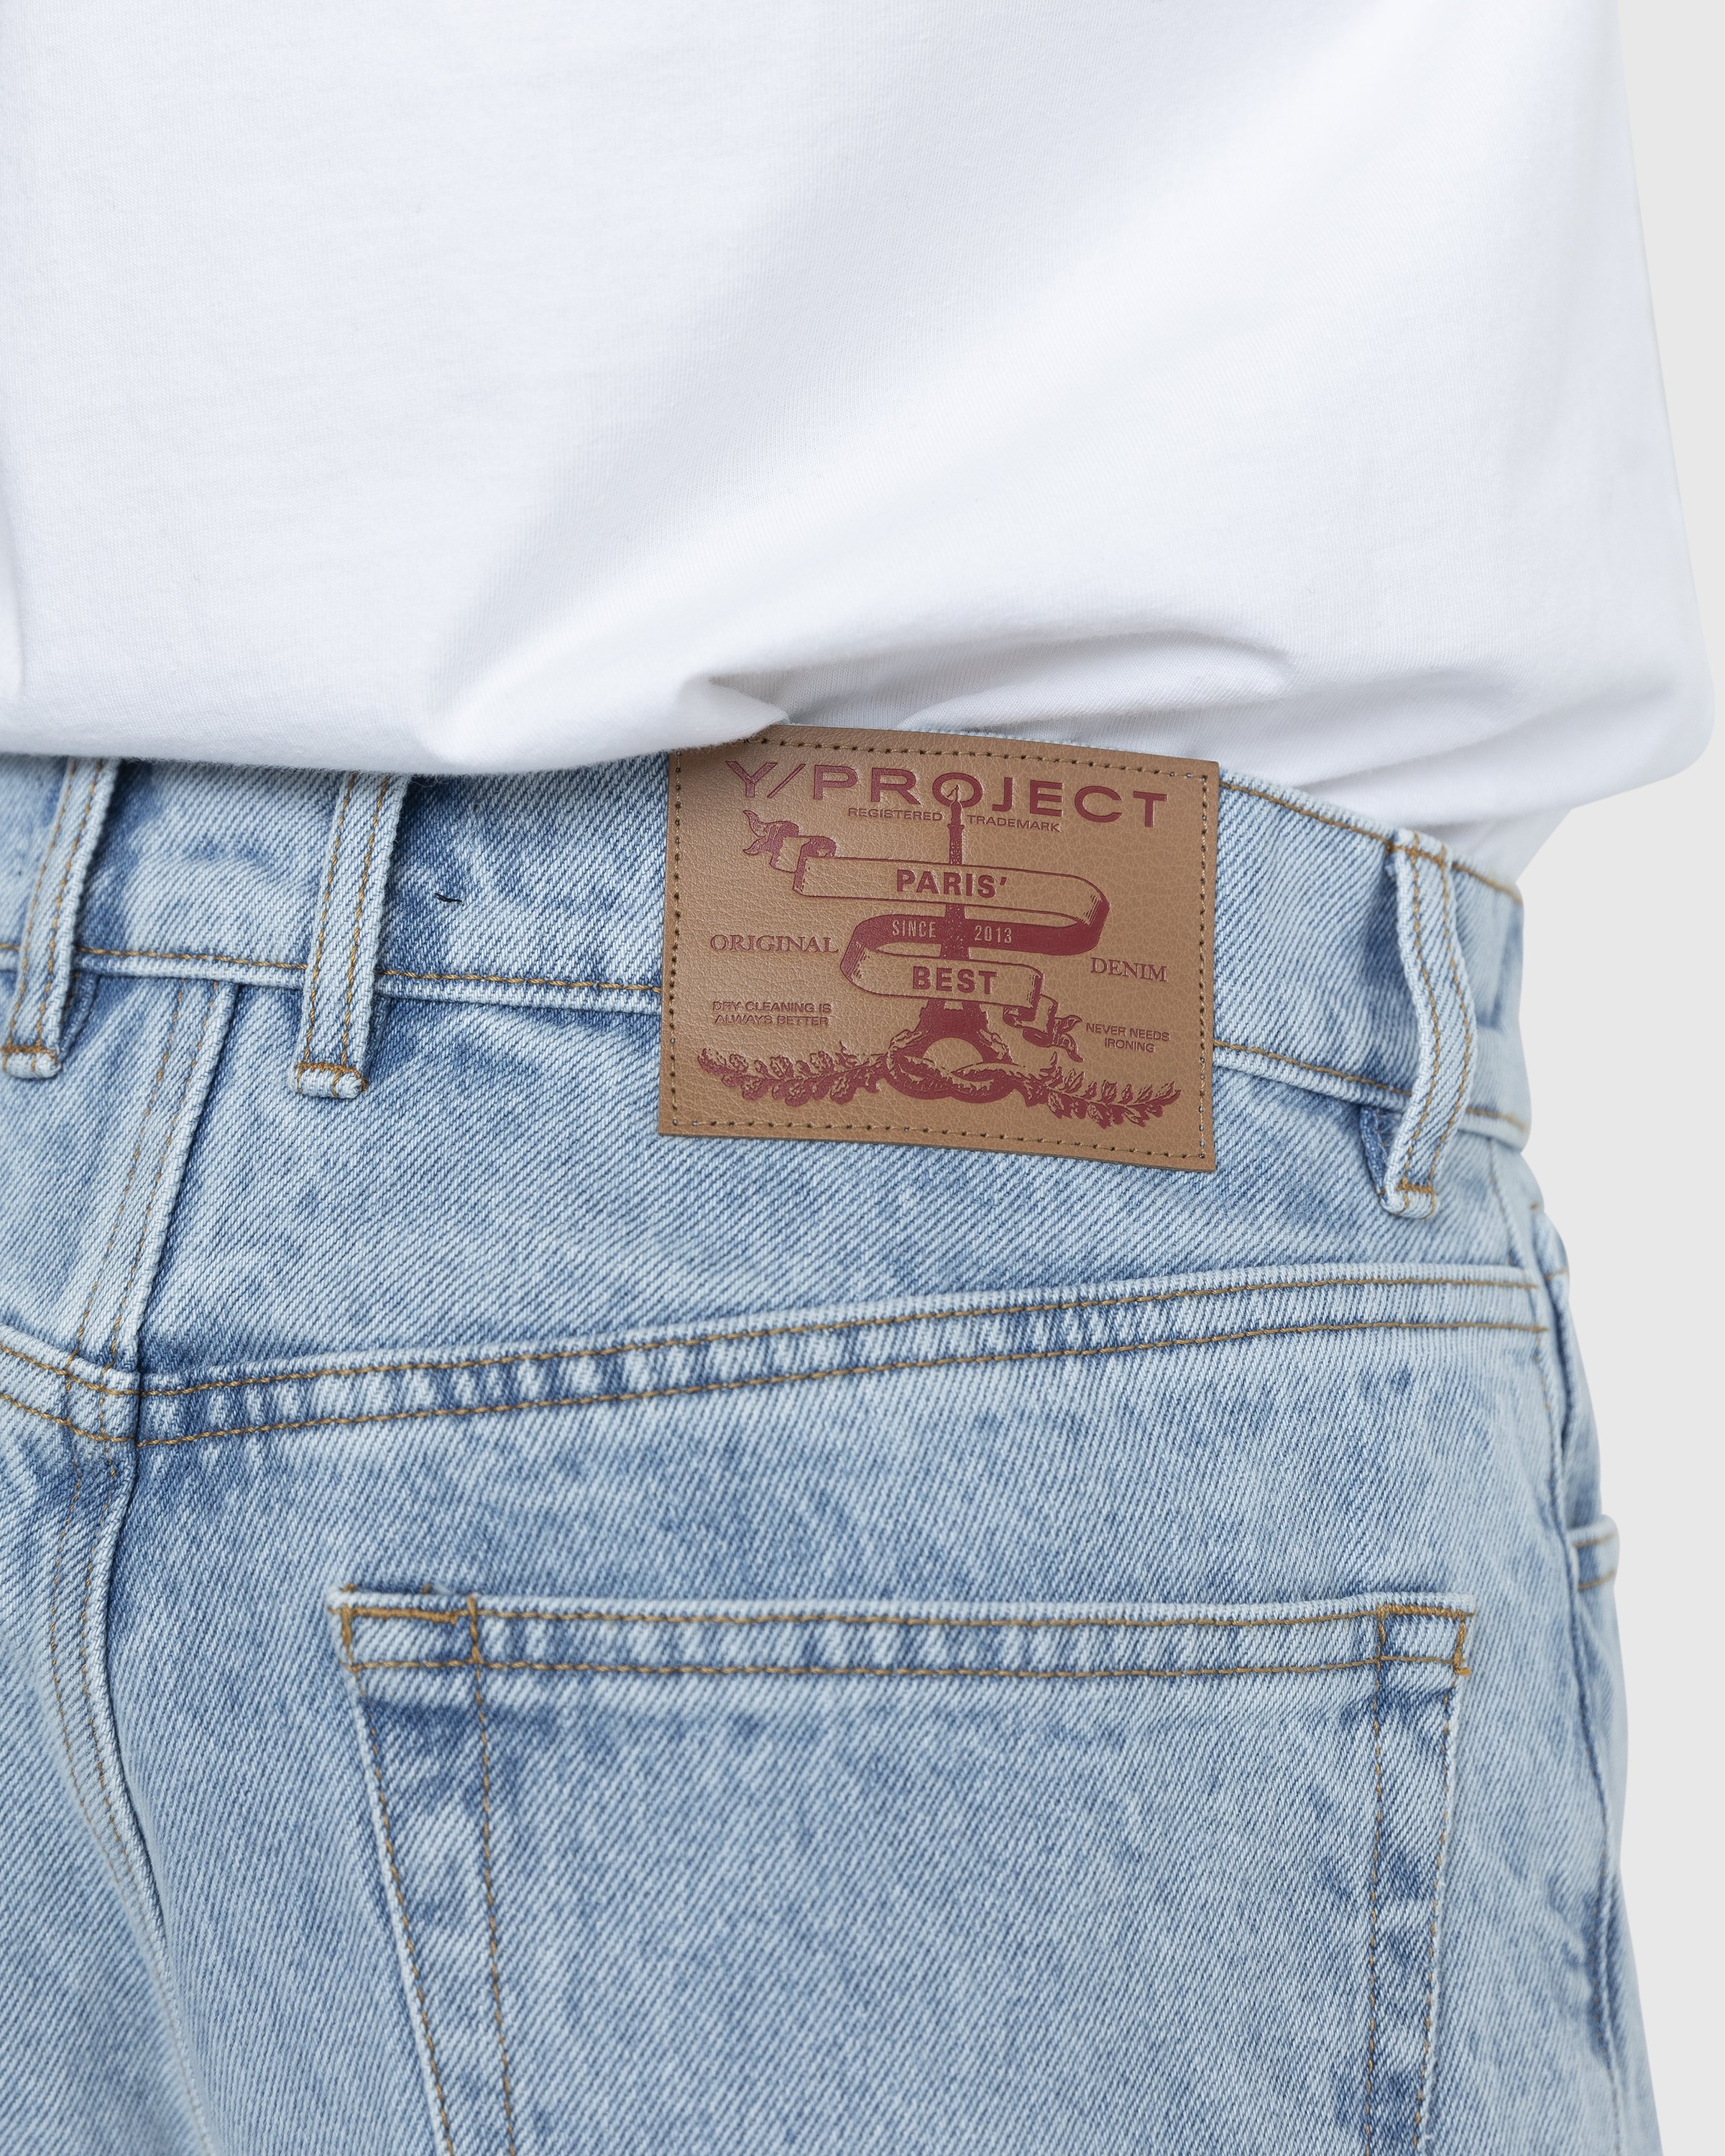 Y/Project - Pinched Logo Jeans Blue - Clothing - Blue - Image 6